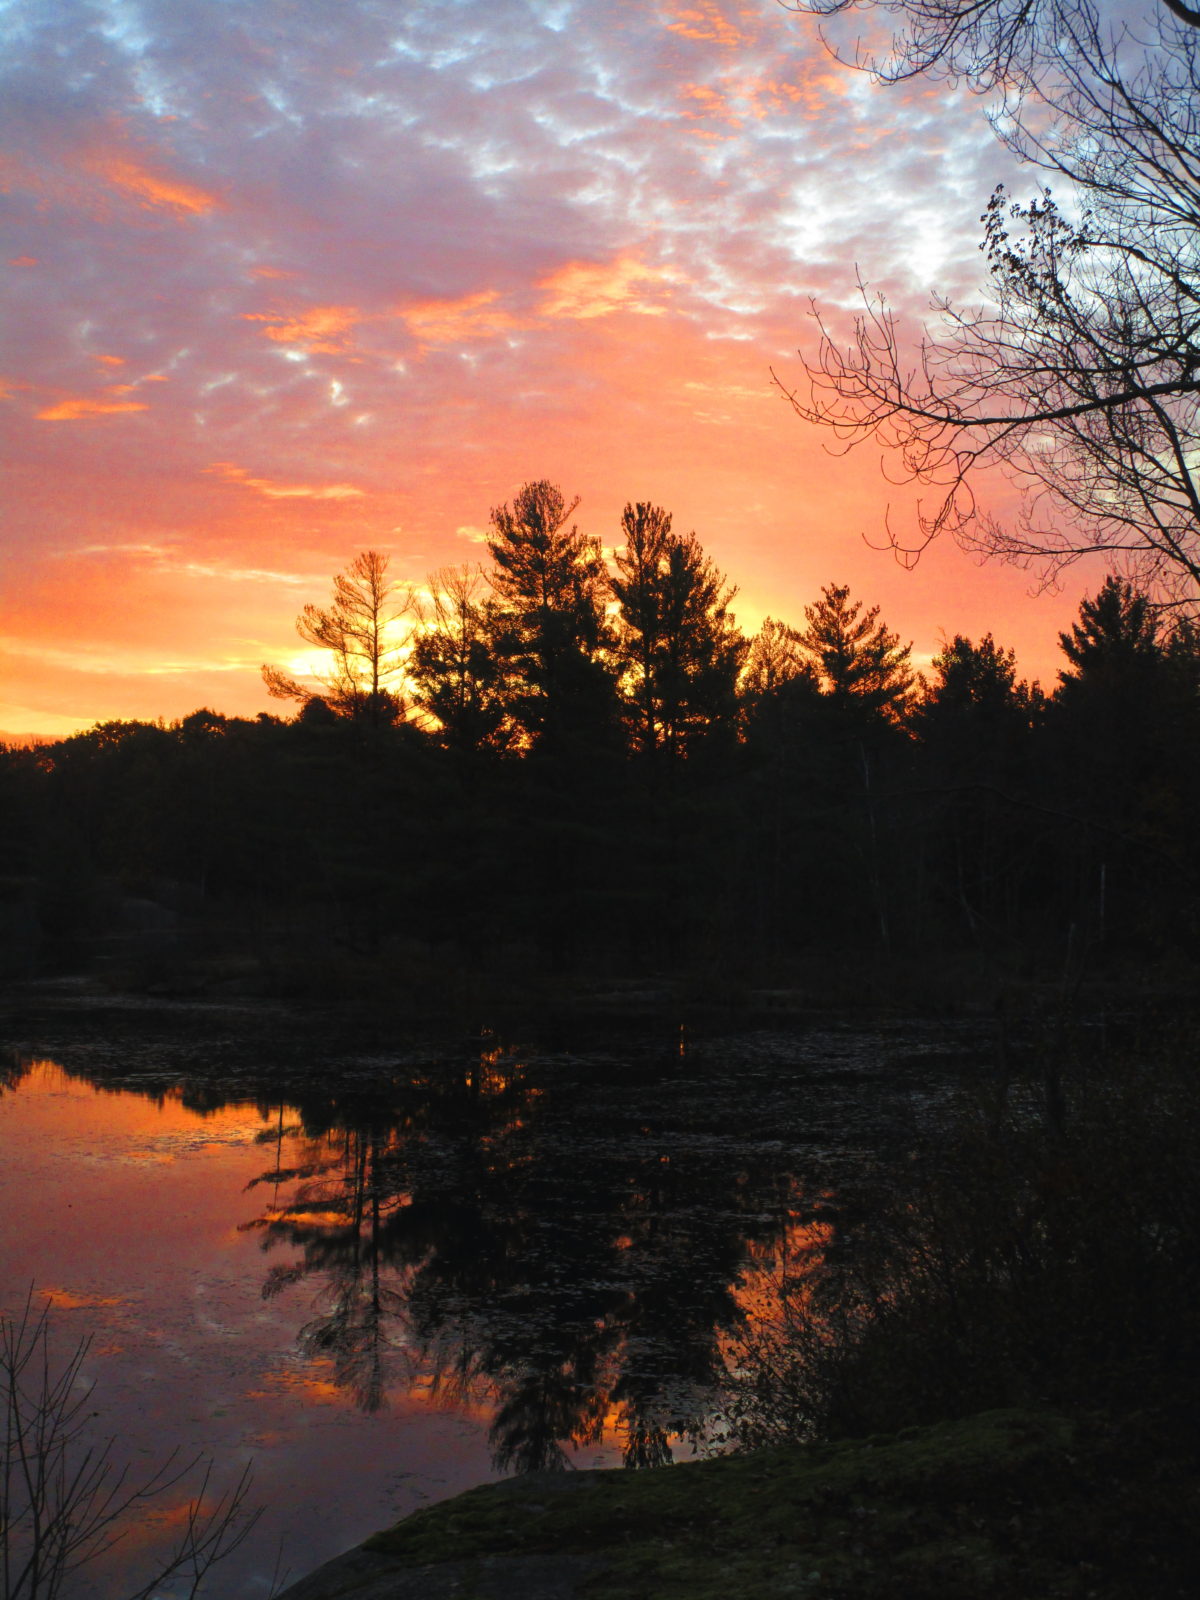 Across a pond, pine trees are silhouetted against a pink and blue dawn.